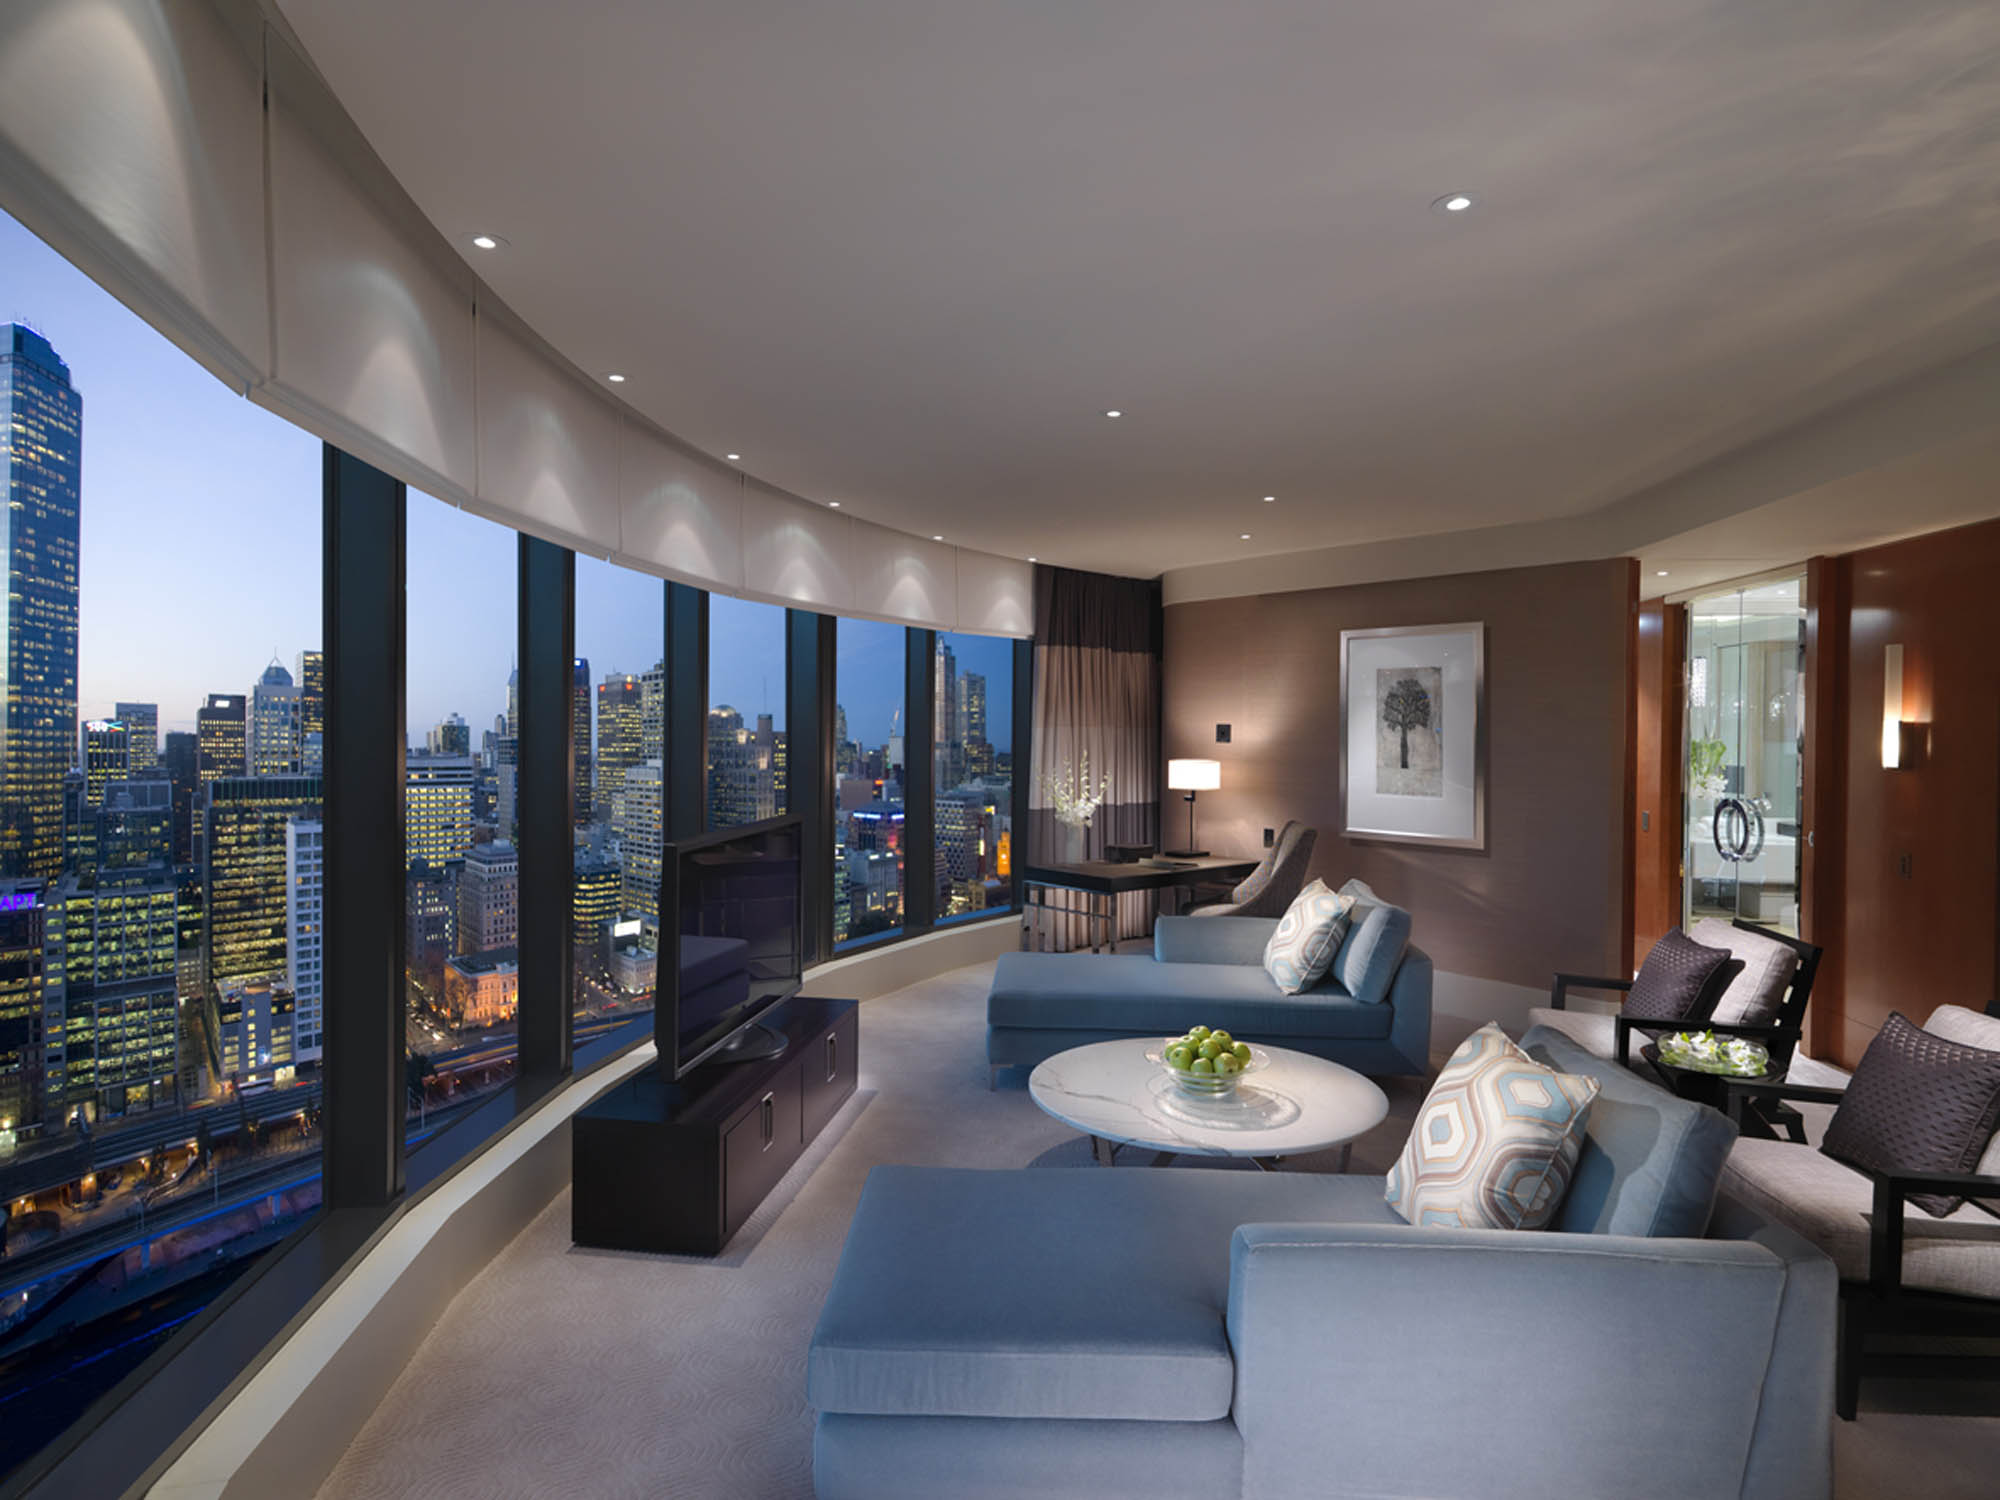 crown towers hotel fitout melbourne crown casino premier suite living room panoramic view-sofa curved window